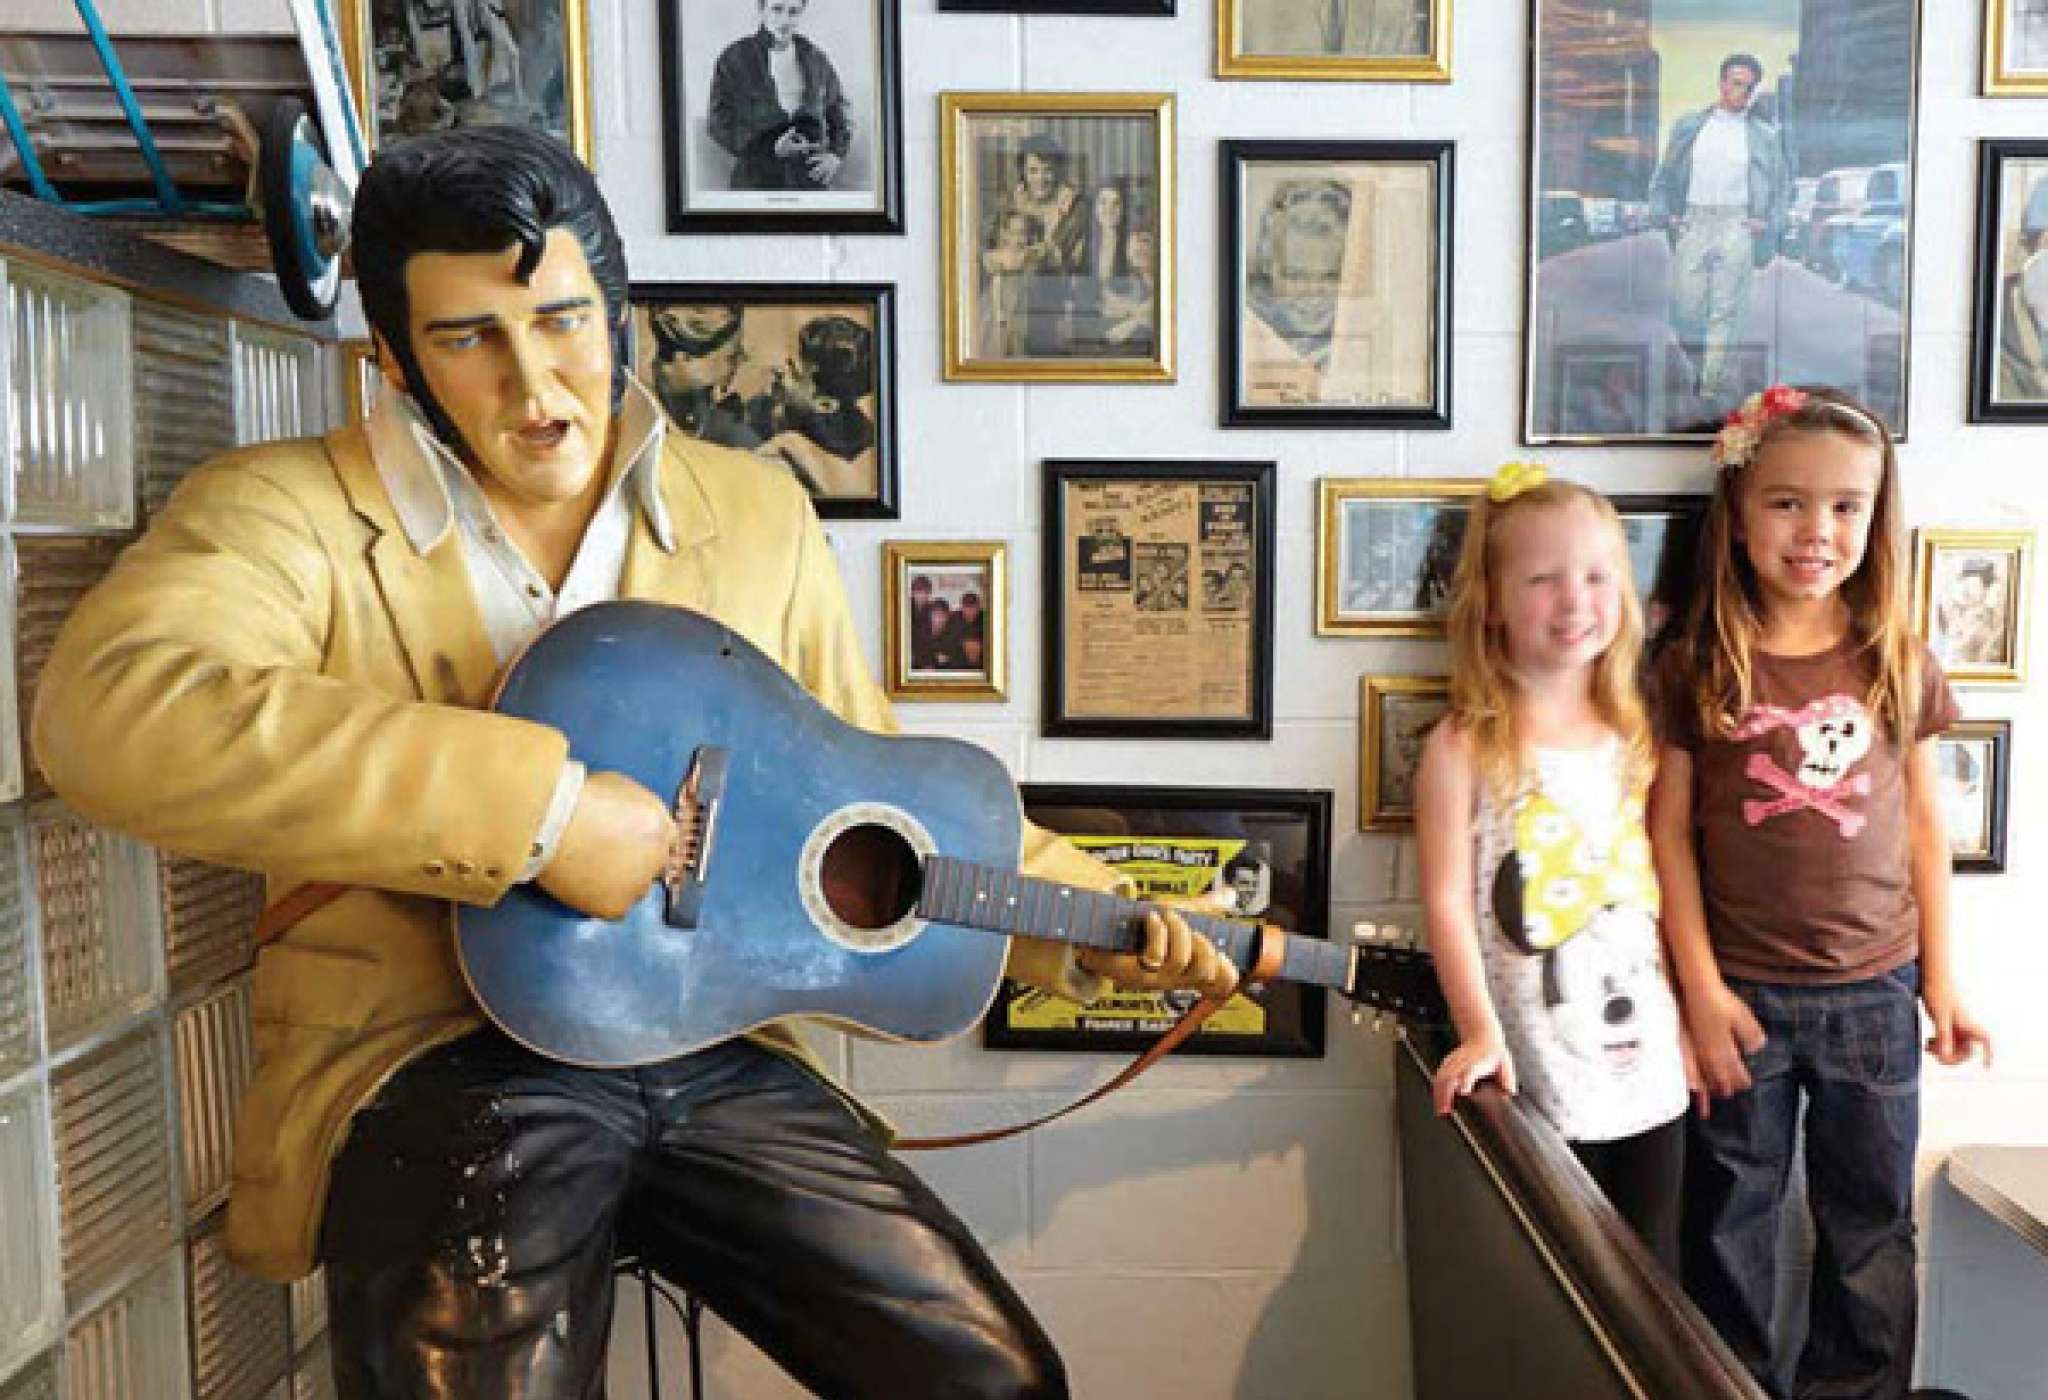 Two young kids getting a photo next to a statue of Elvis Presley holding a guitar 